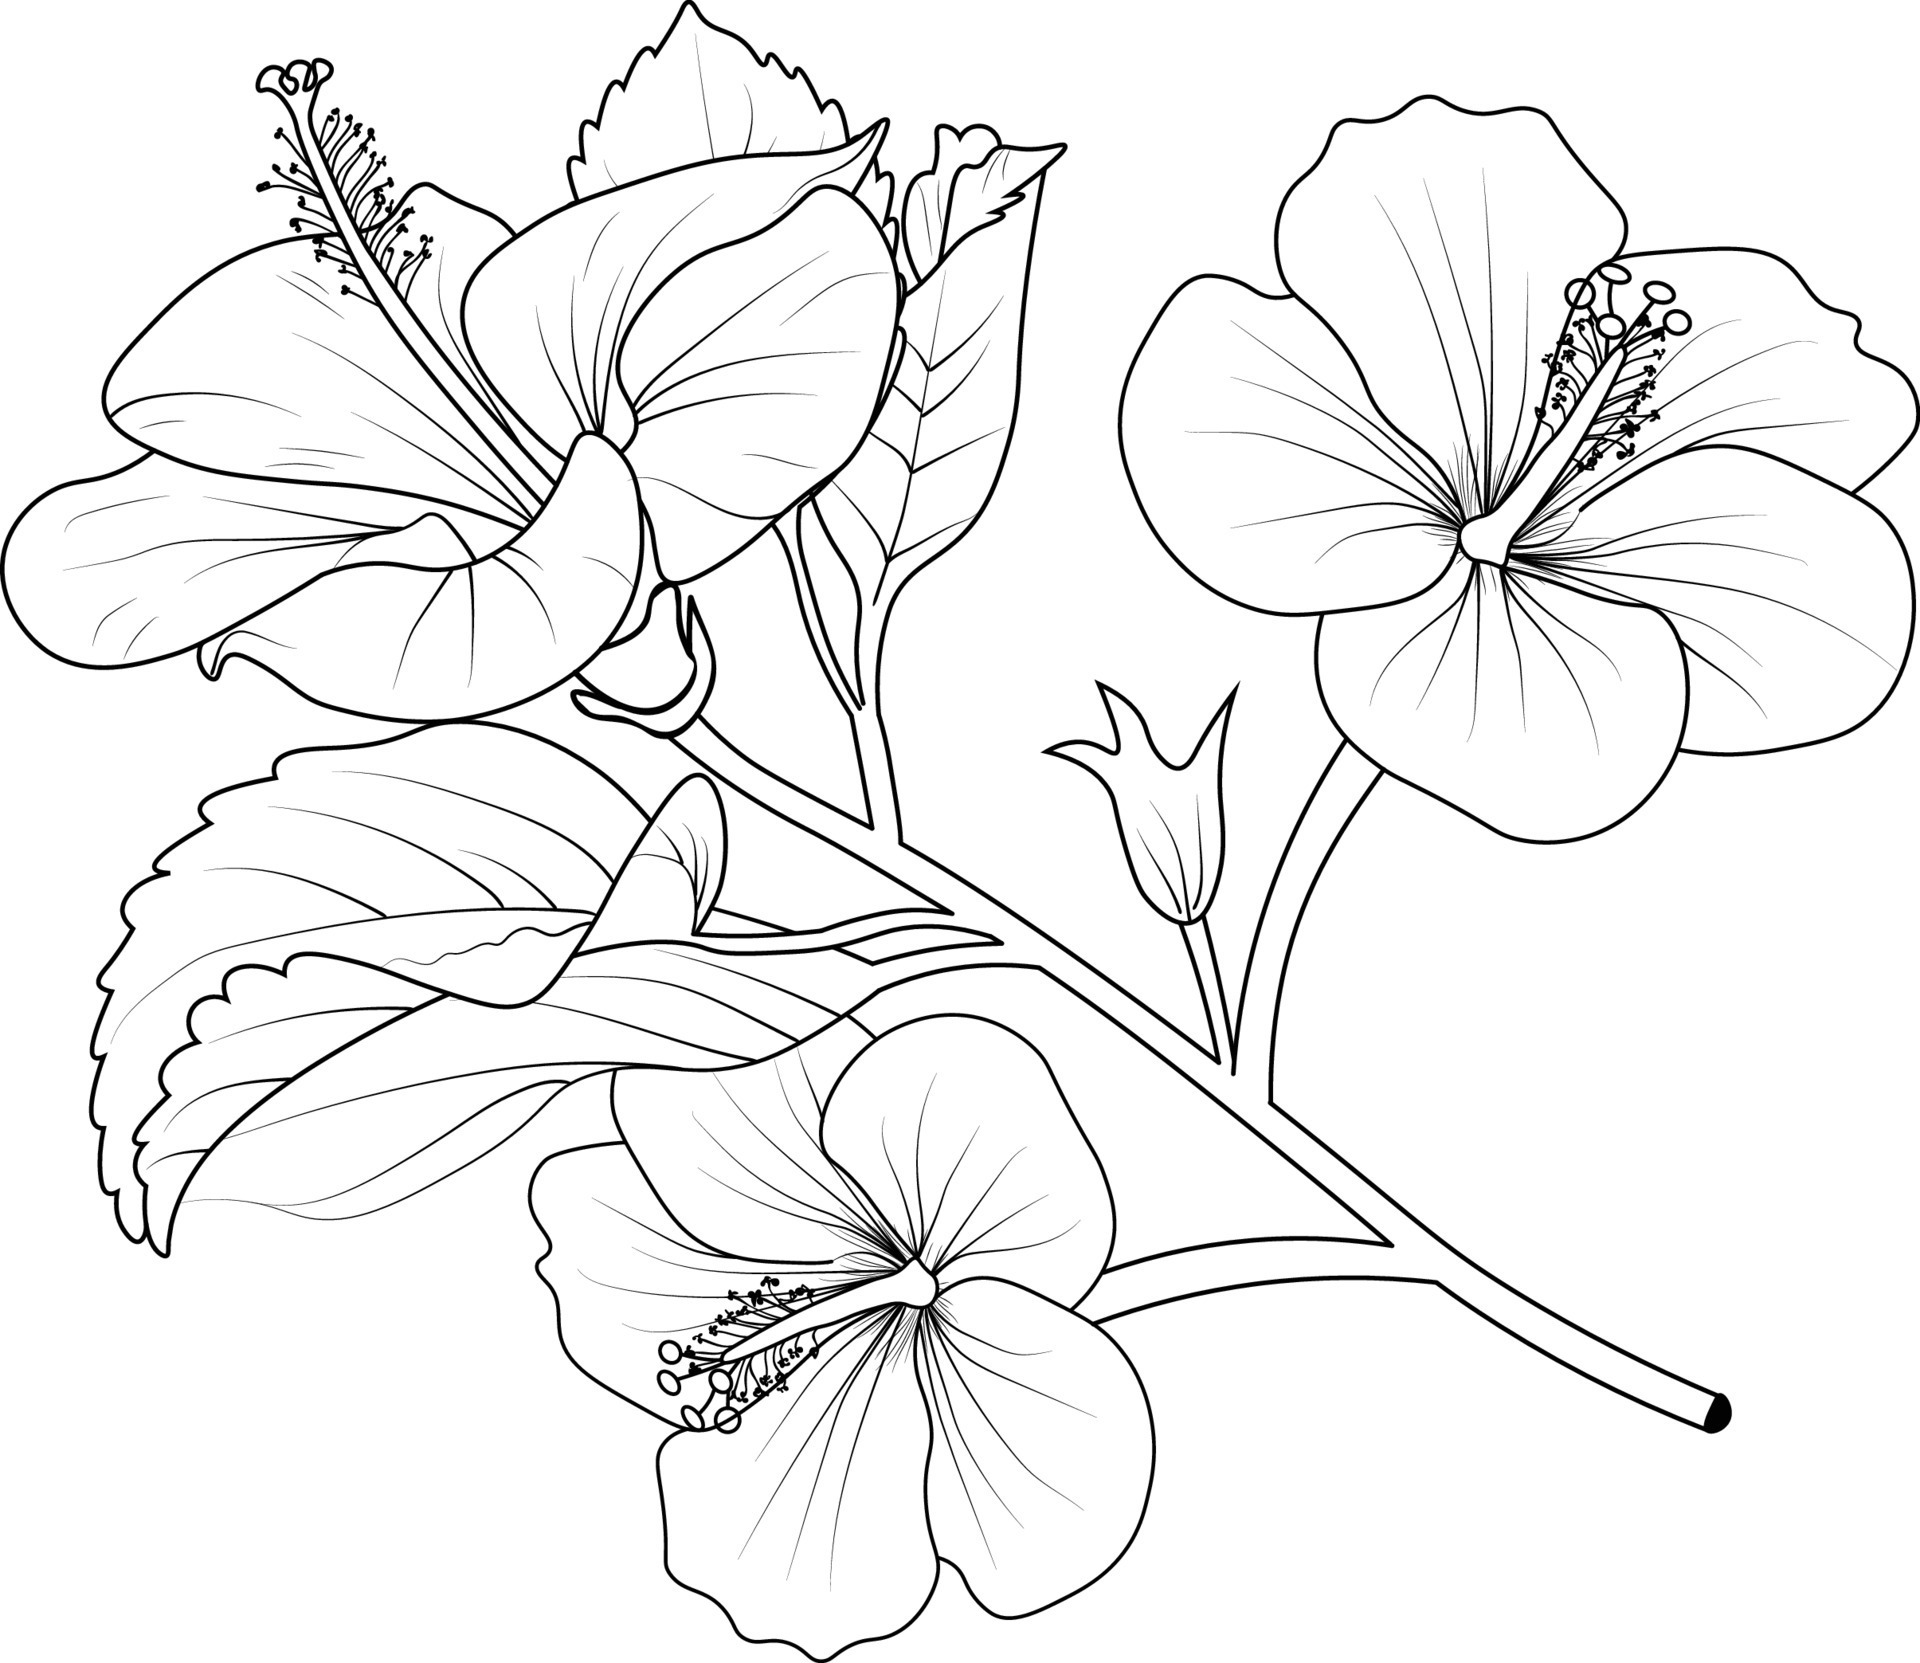 16400 Hibiscus Flower Drawing Stock Photos Pictures  RoyaltyFree  Images  iStock